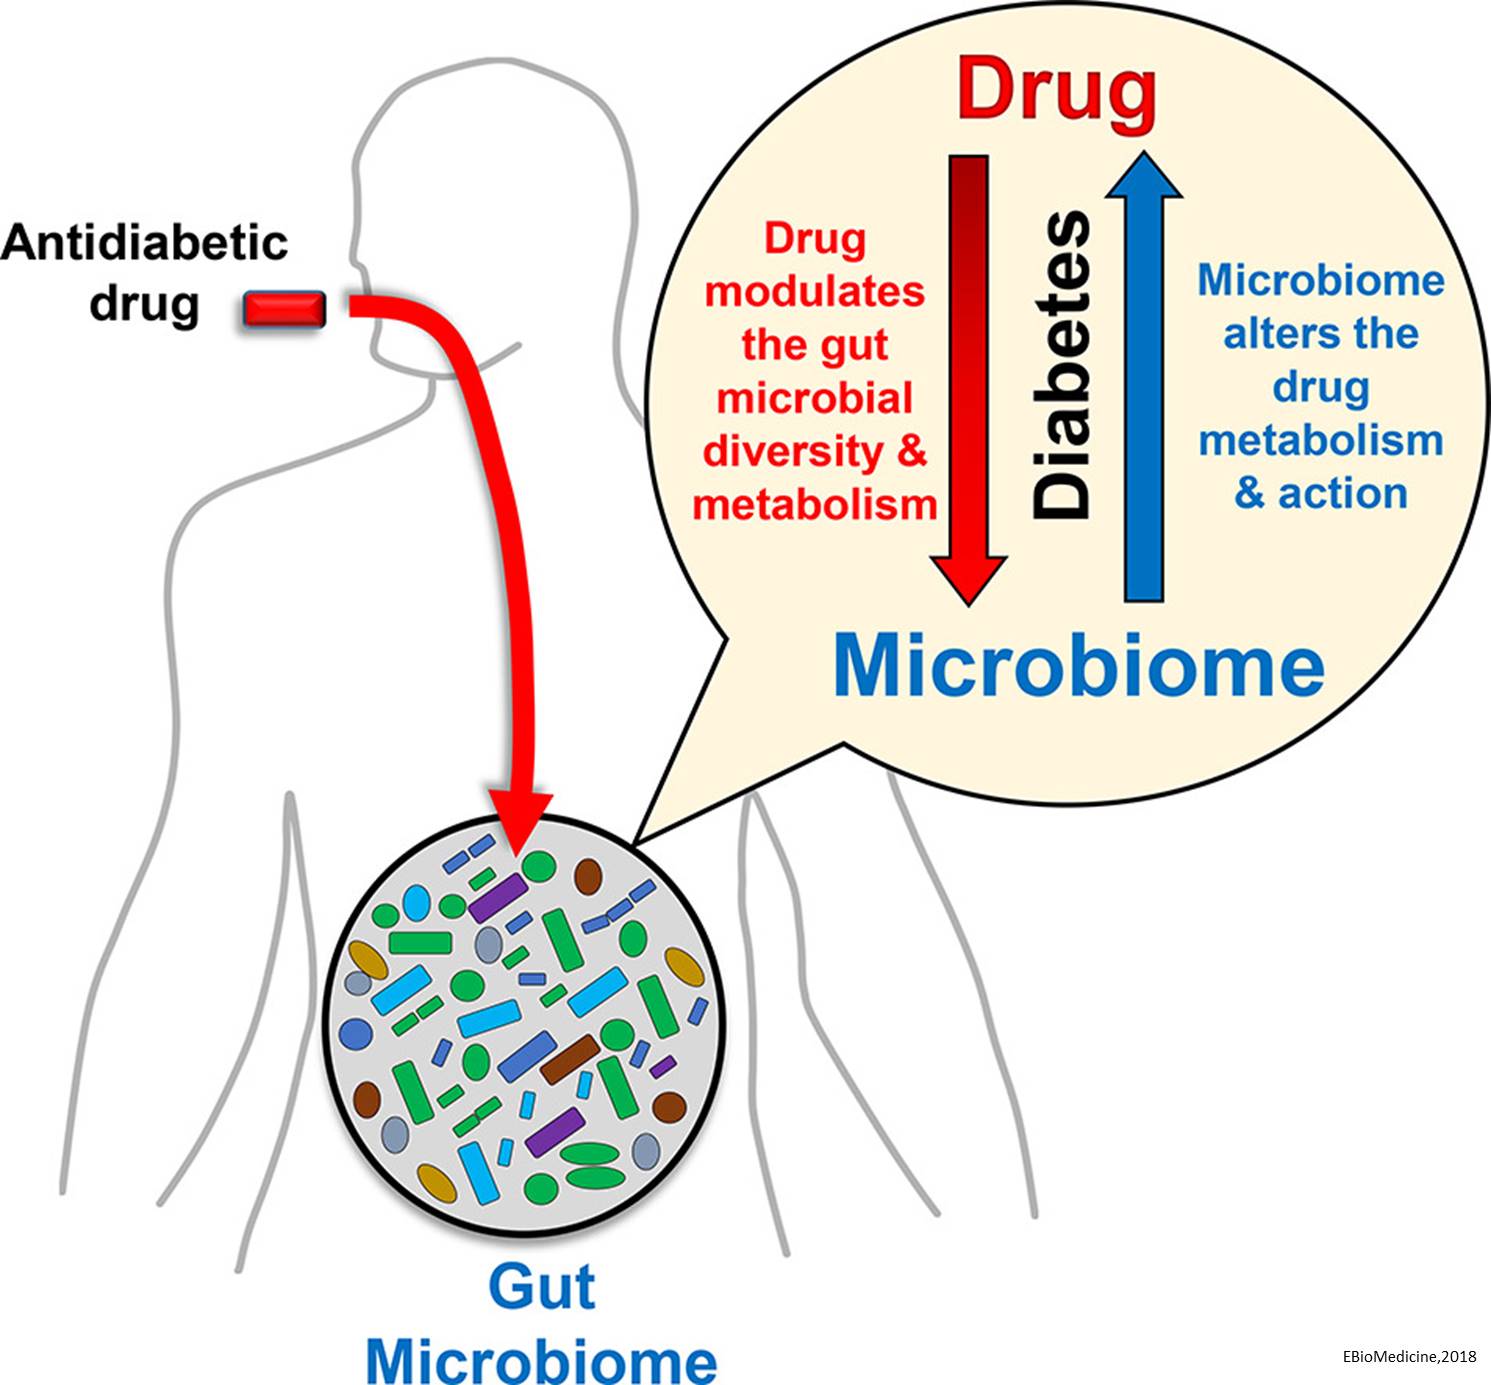 Gut microbiome may affect some anti